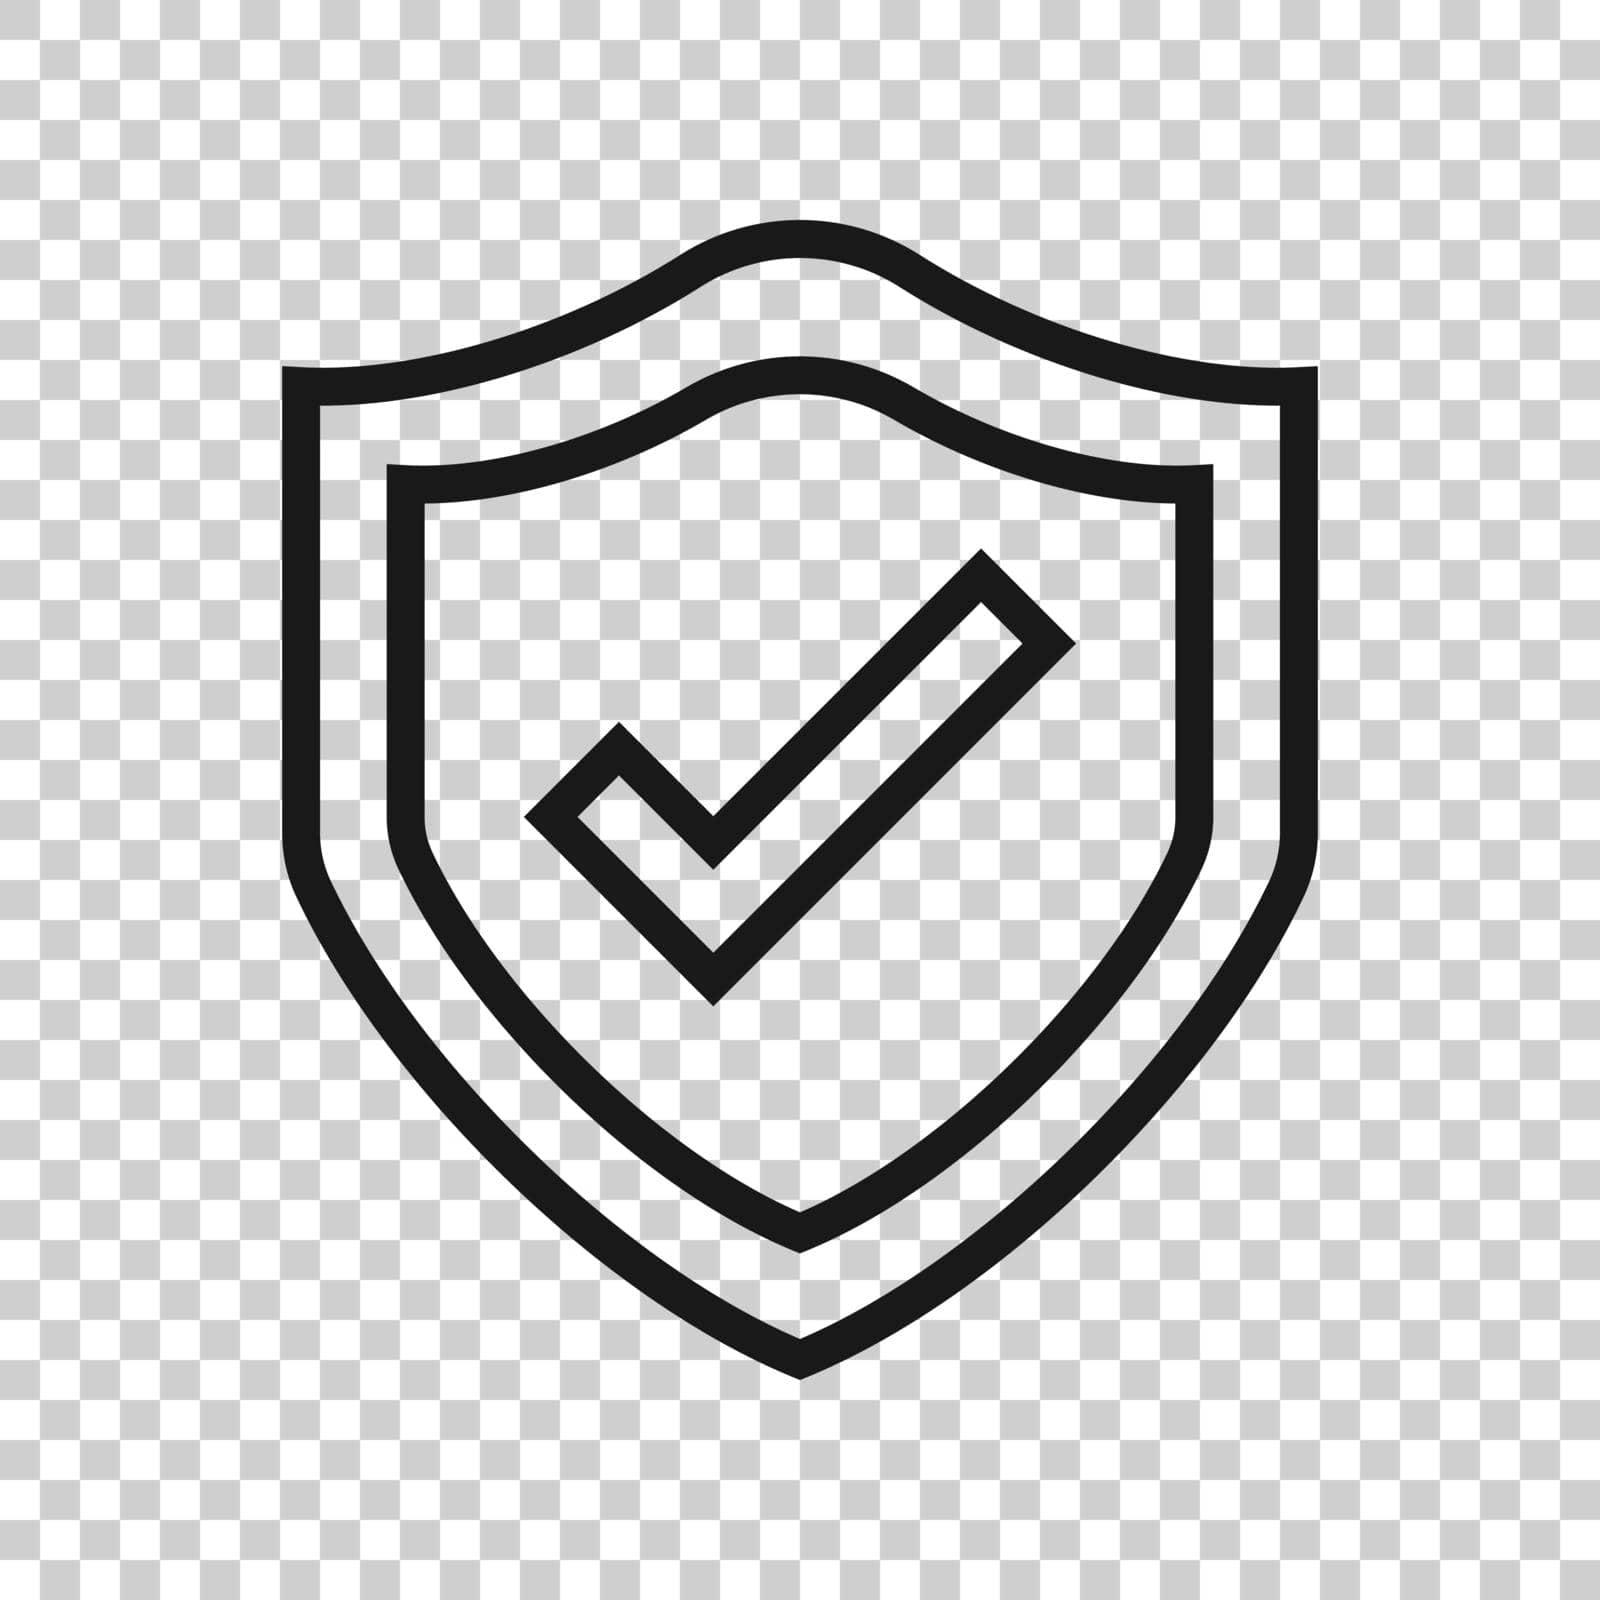 Shield with check mark icon in flat style. Protect vector illustration on white isolated background. Checkmark guard business concept. by LysenkoA